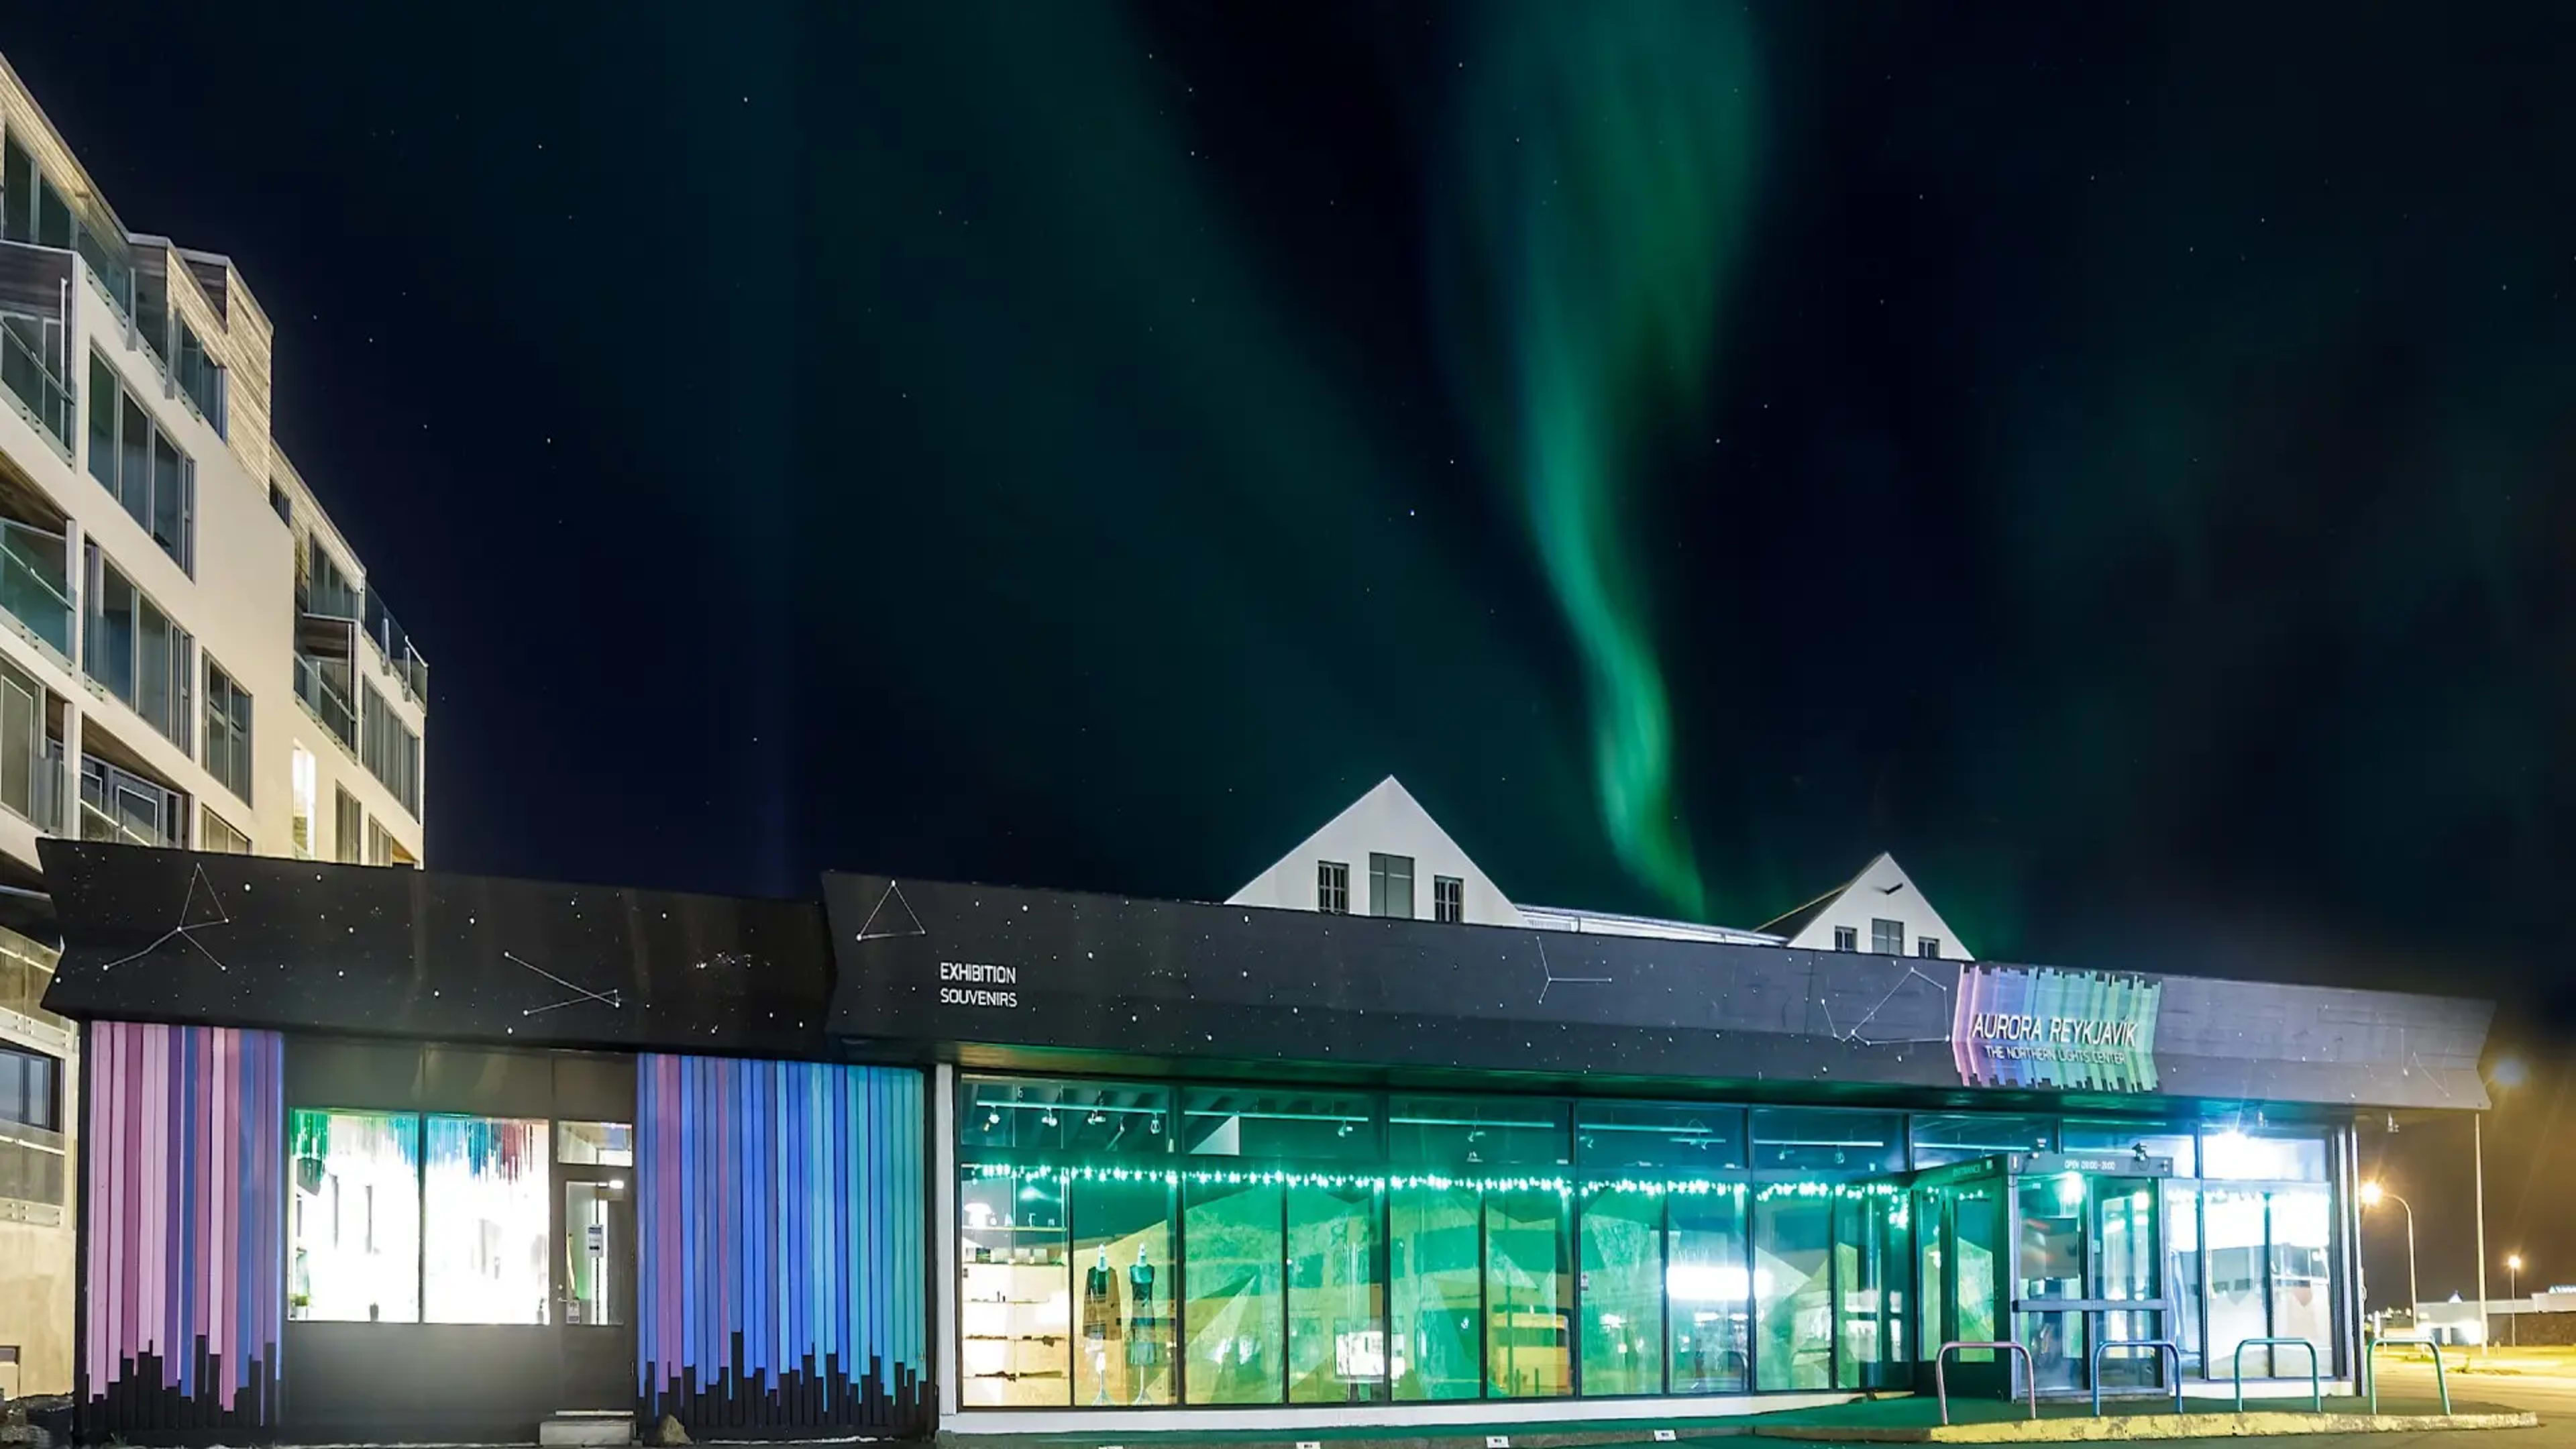 The Northern Lights visible above the Aurora Reykjavík museum